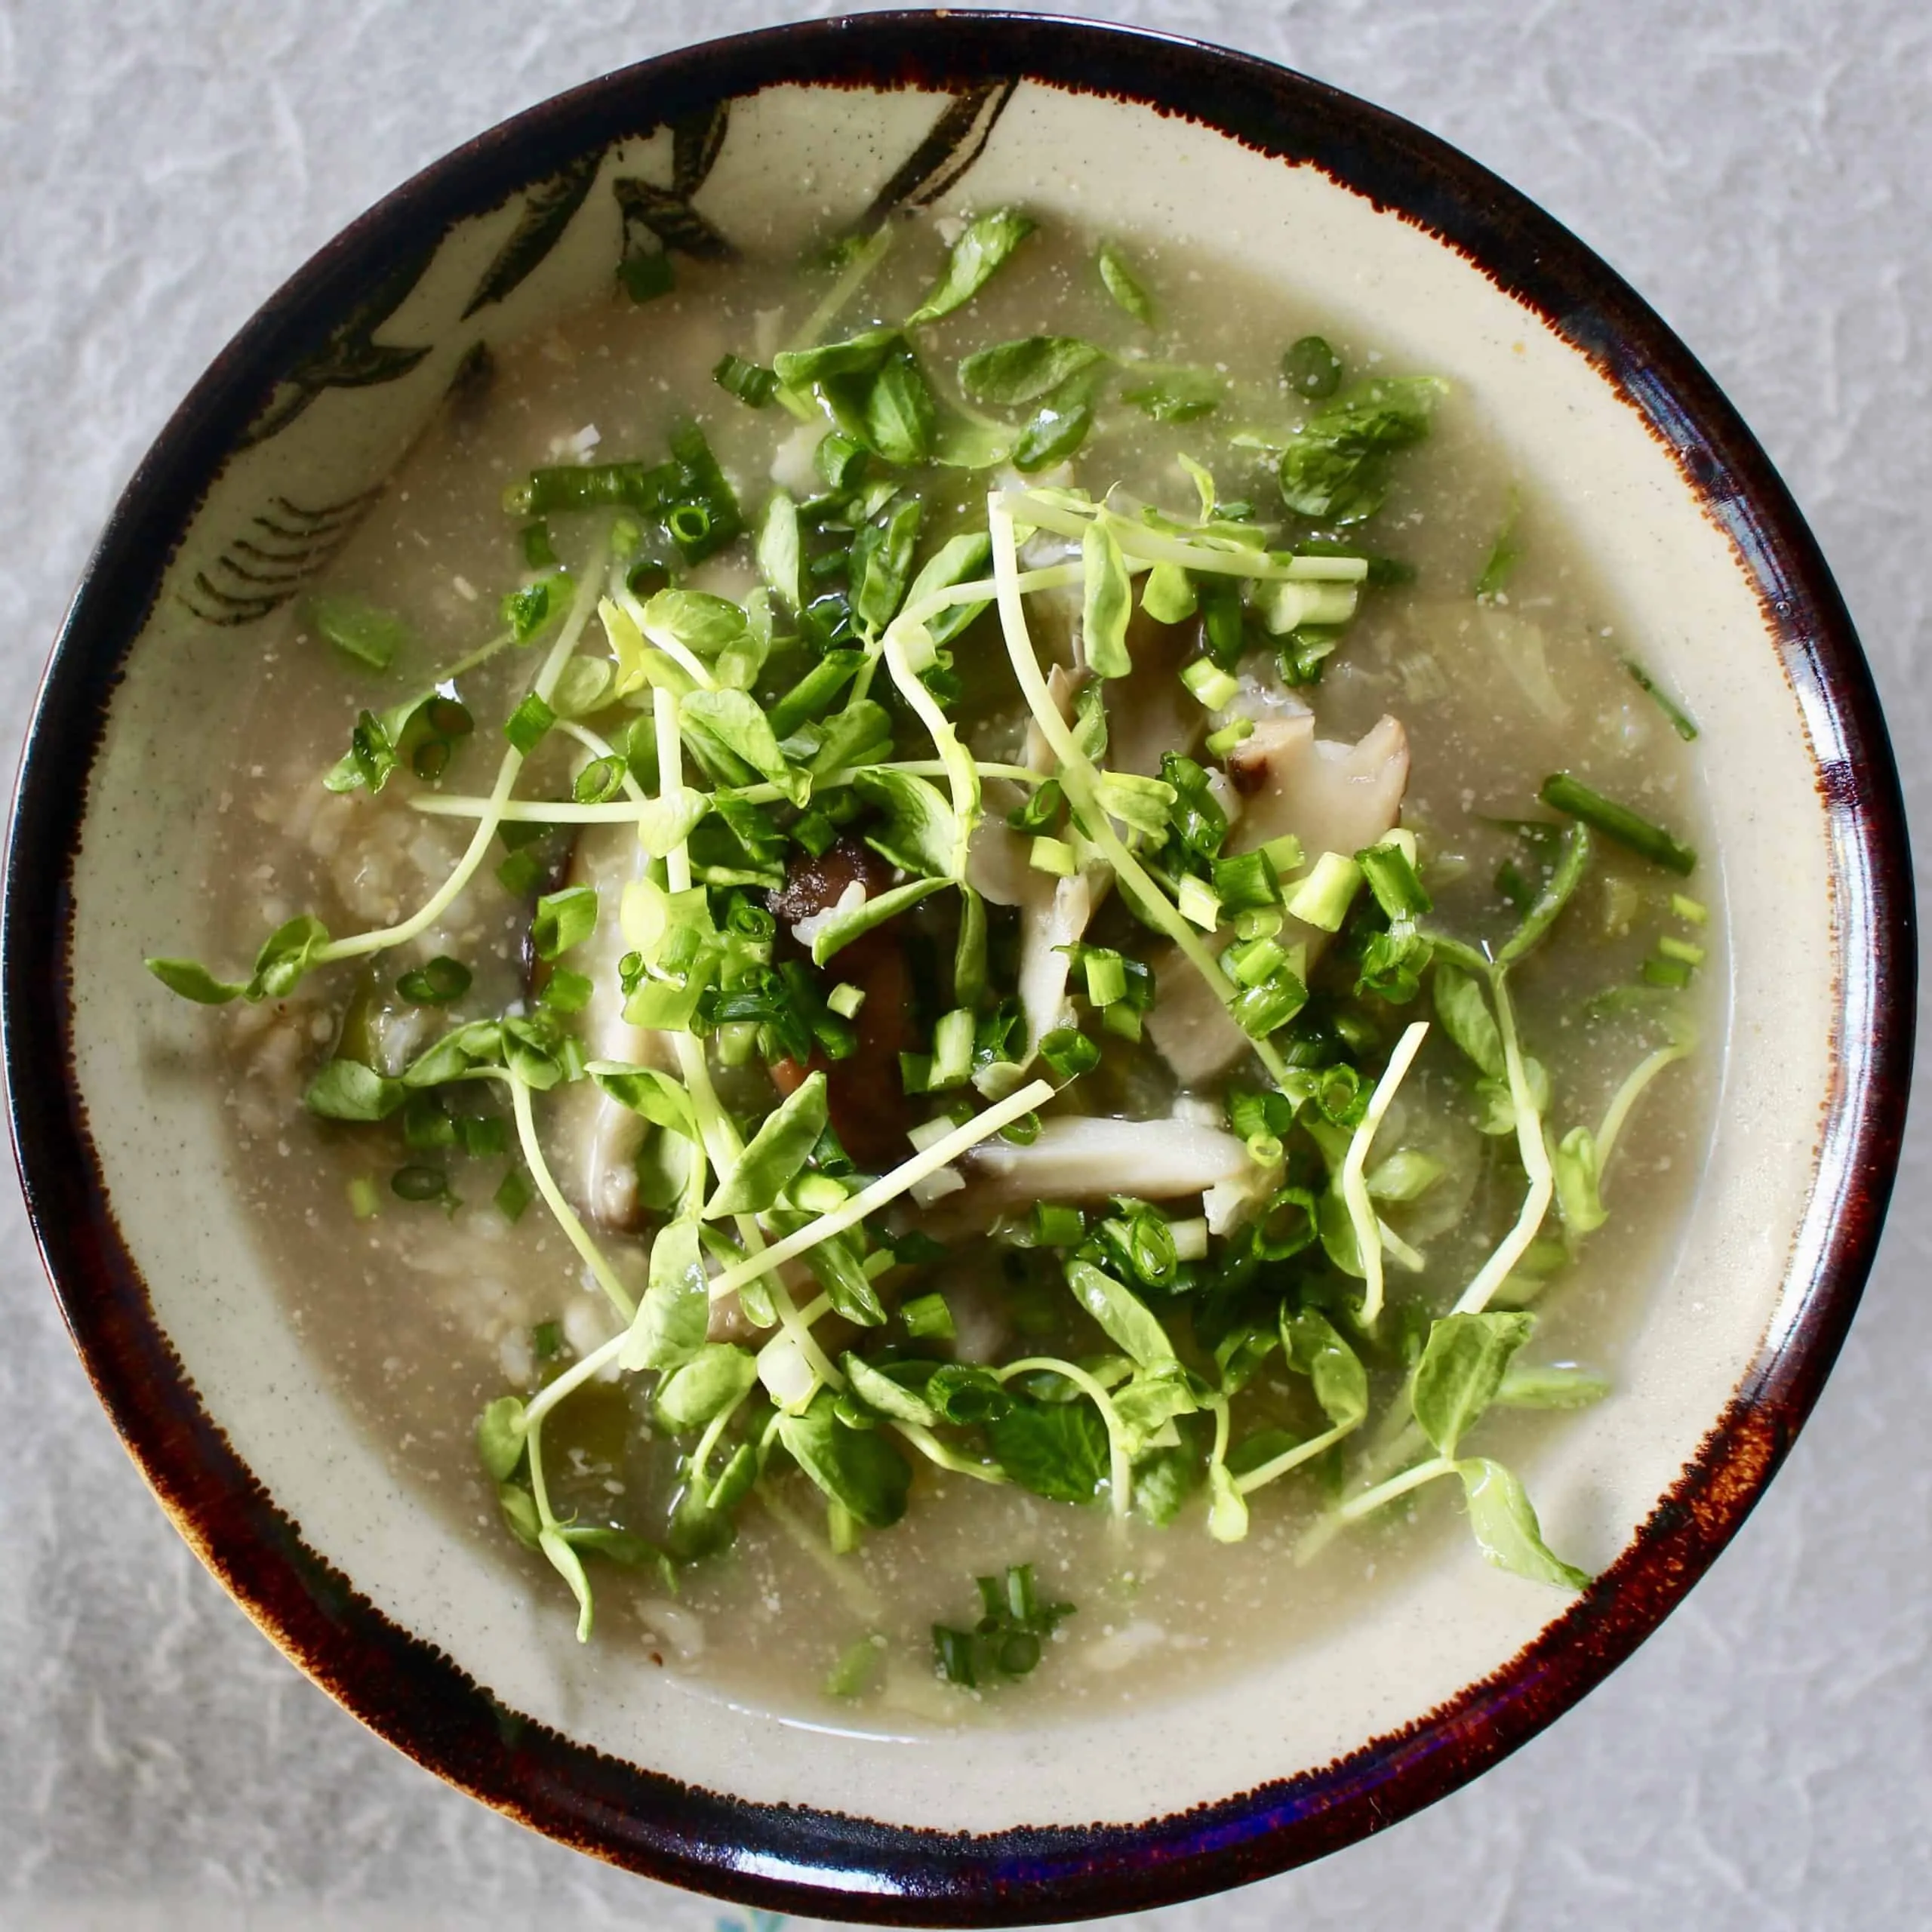 Miso brown rice soup in a brown bowl